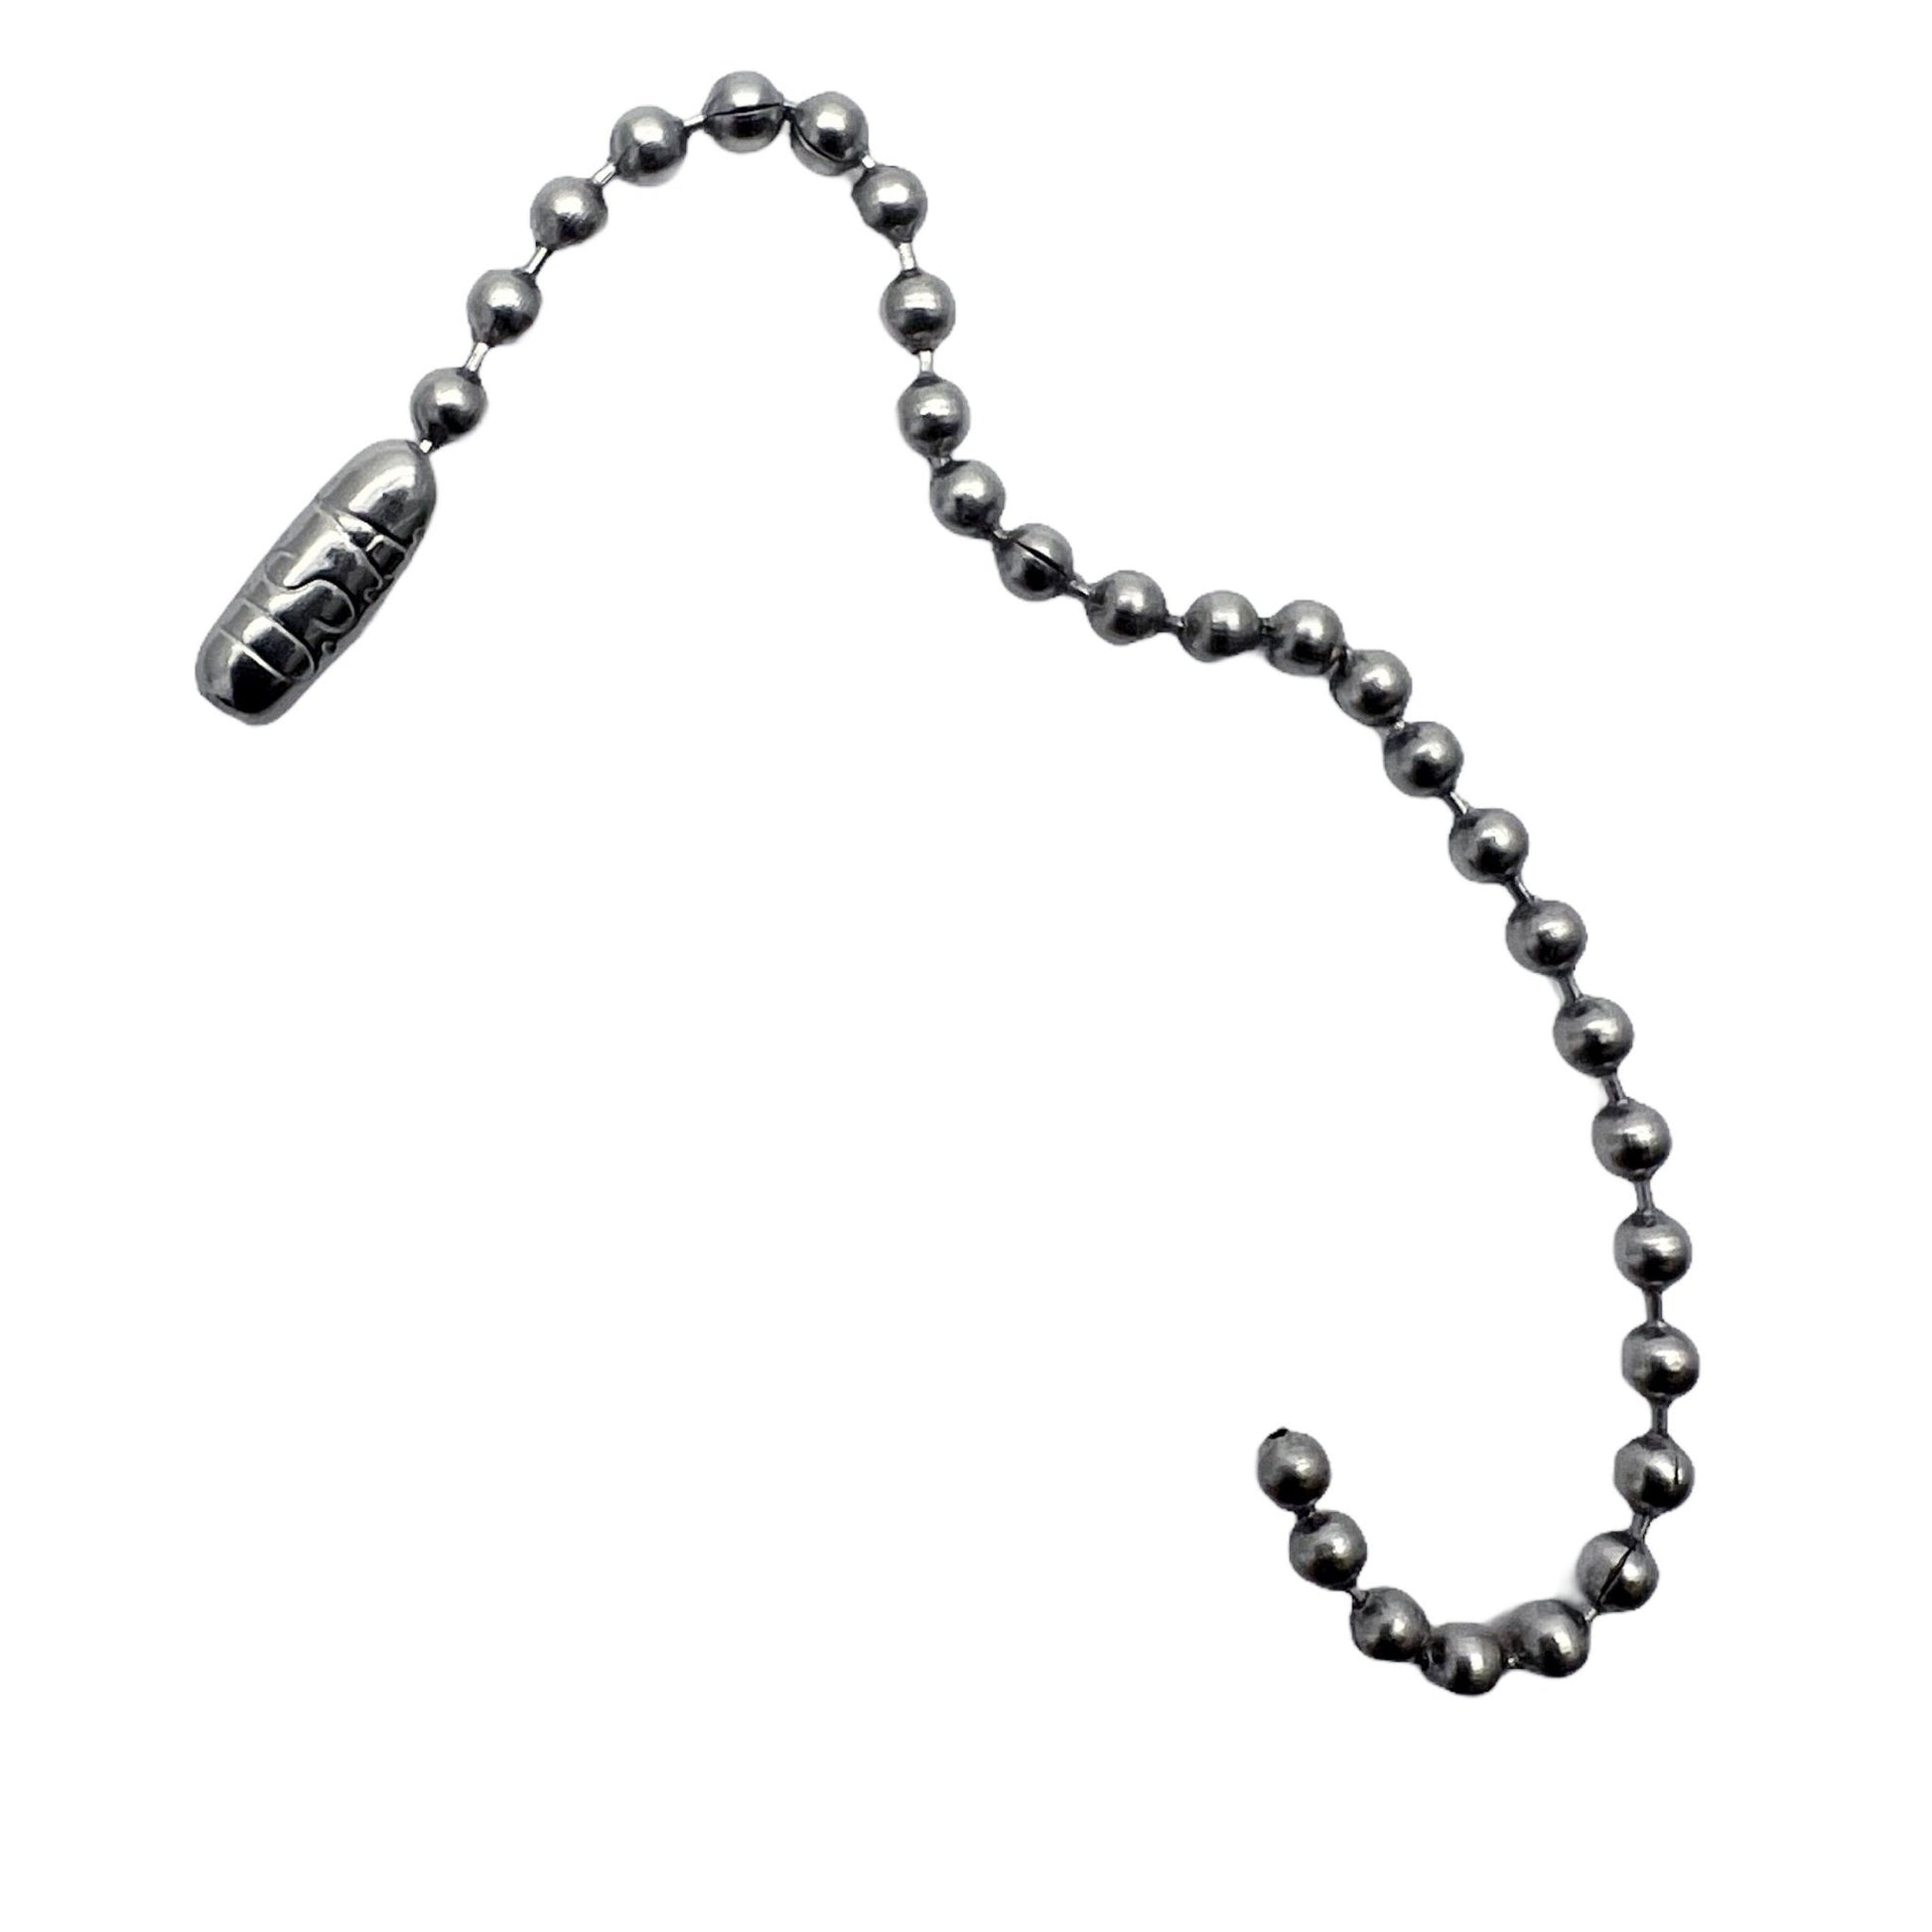 Stainless Steel Ball Chains Bead For Dog Tags Necklaces 304 Grade 4" Length (10cm) - TheDogTagCo